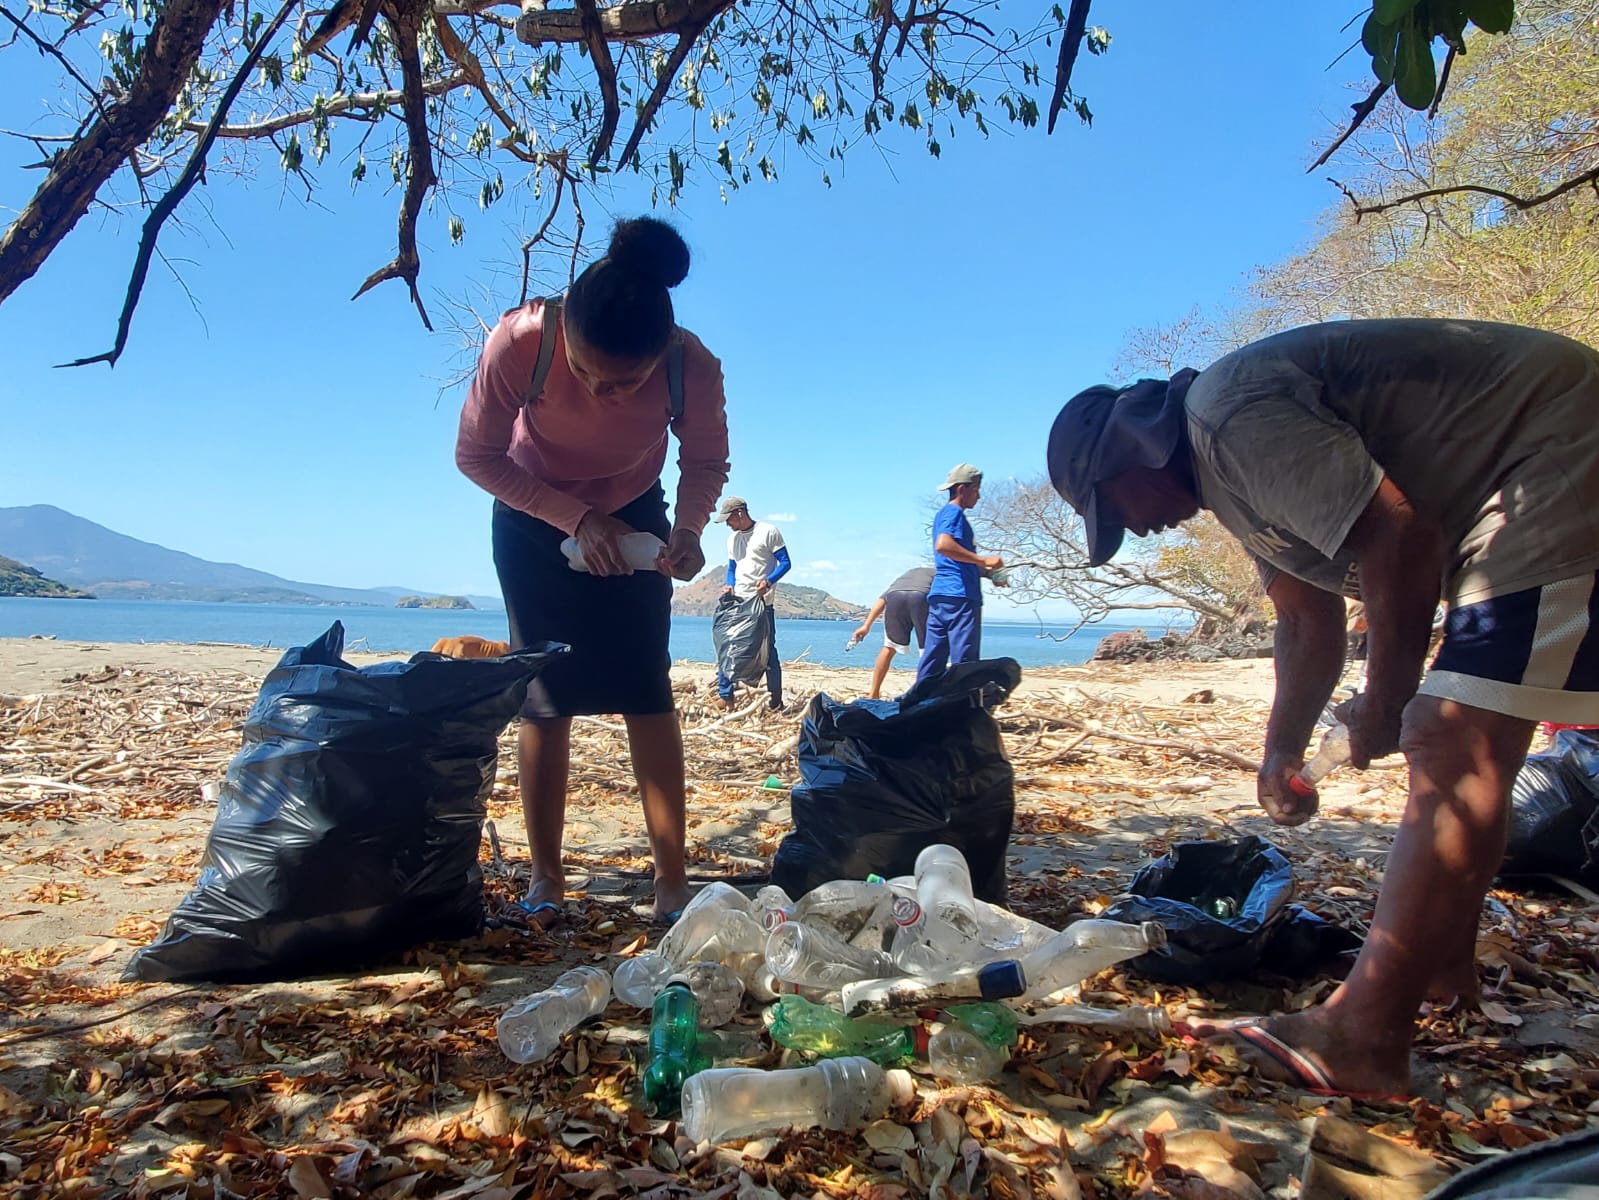 A group of people collect old bottles in trash cans on a sunny beach